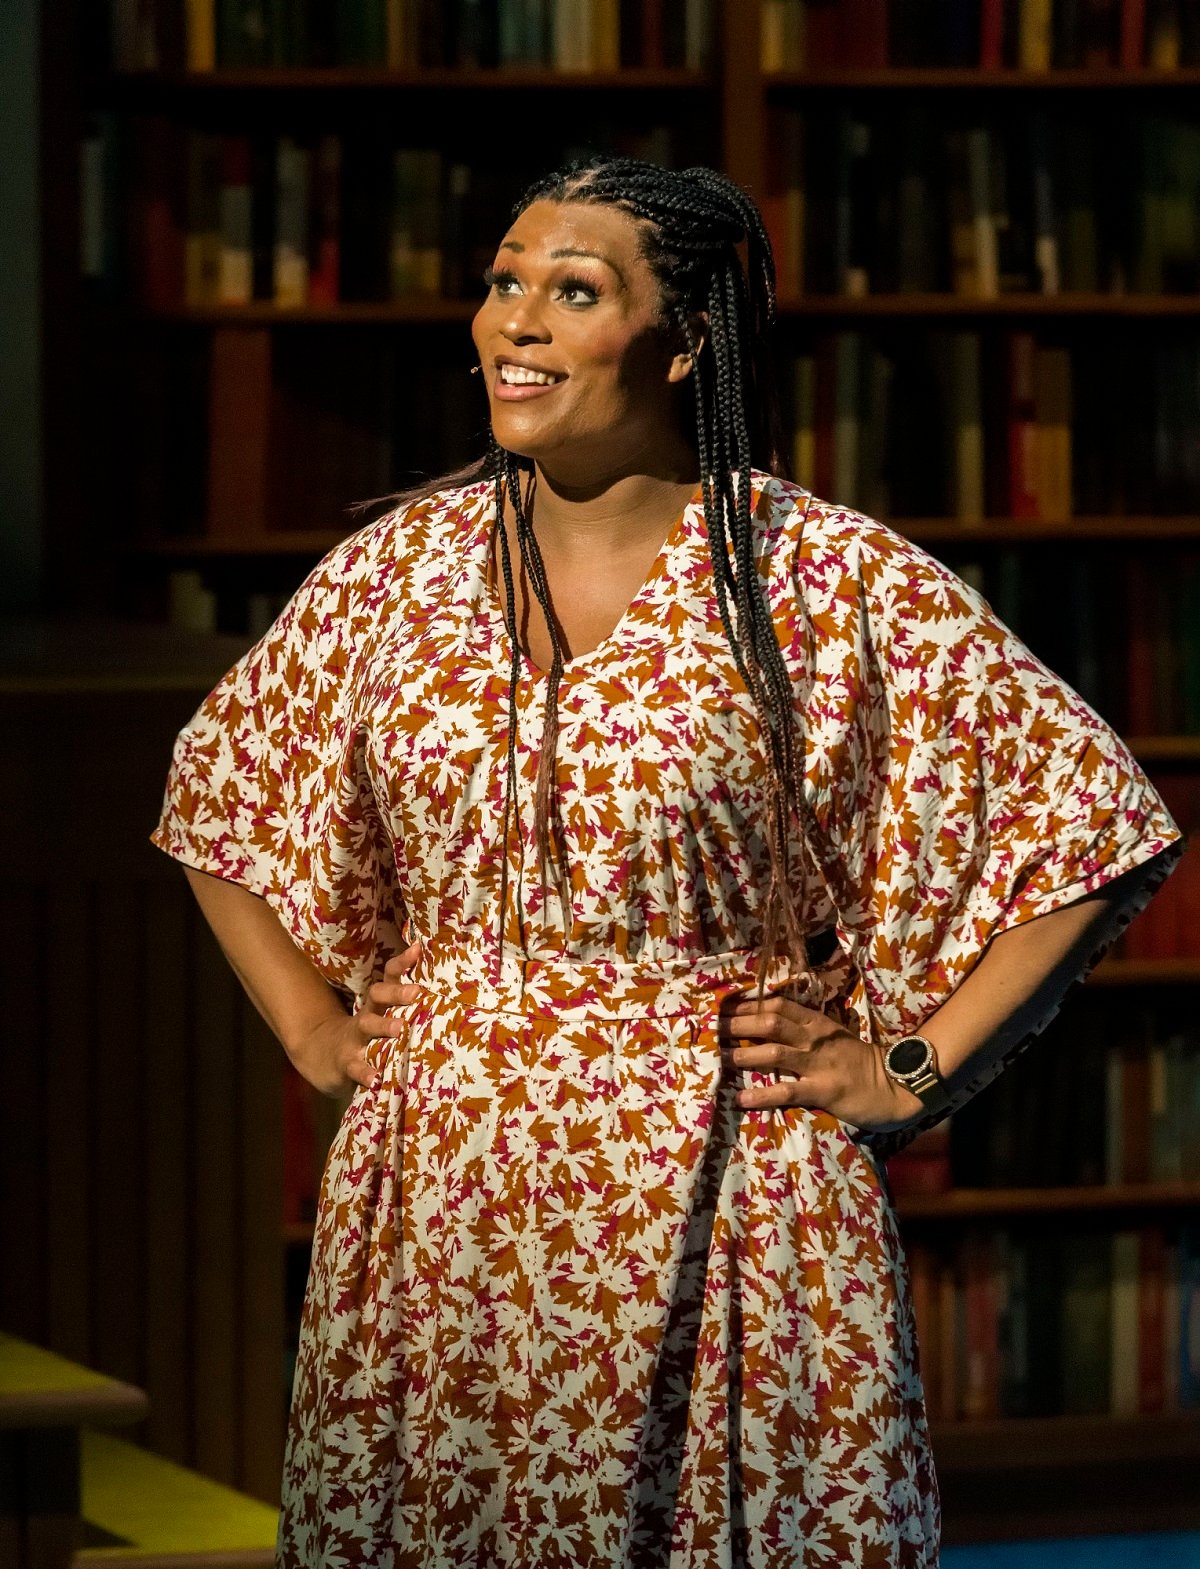 Image of Peppermint as Davina in 'A Transparent Musical' at the Mark Taper Forum in L.A. She is a tall Black woman with long braids standing with her hands on her hips and smiling, wearing a brown and white leaf-patterned dress)